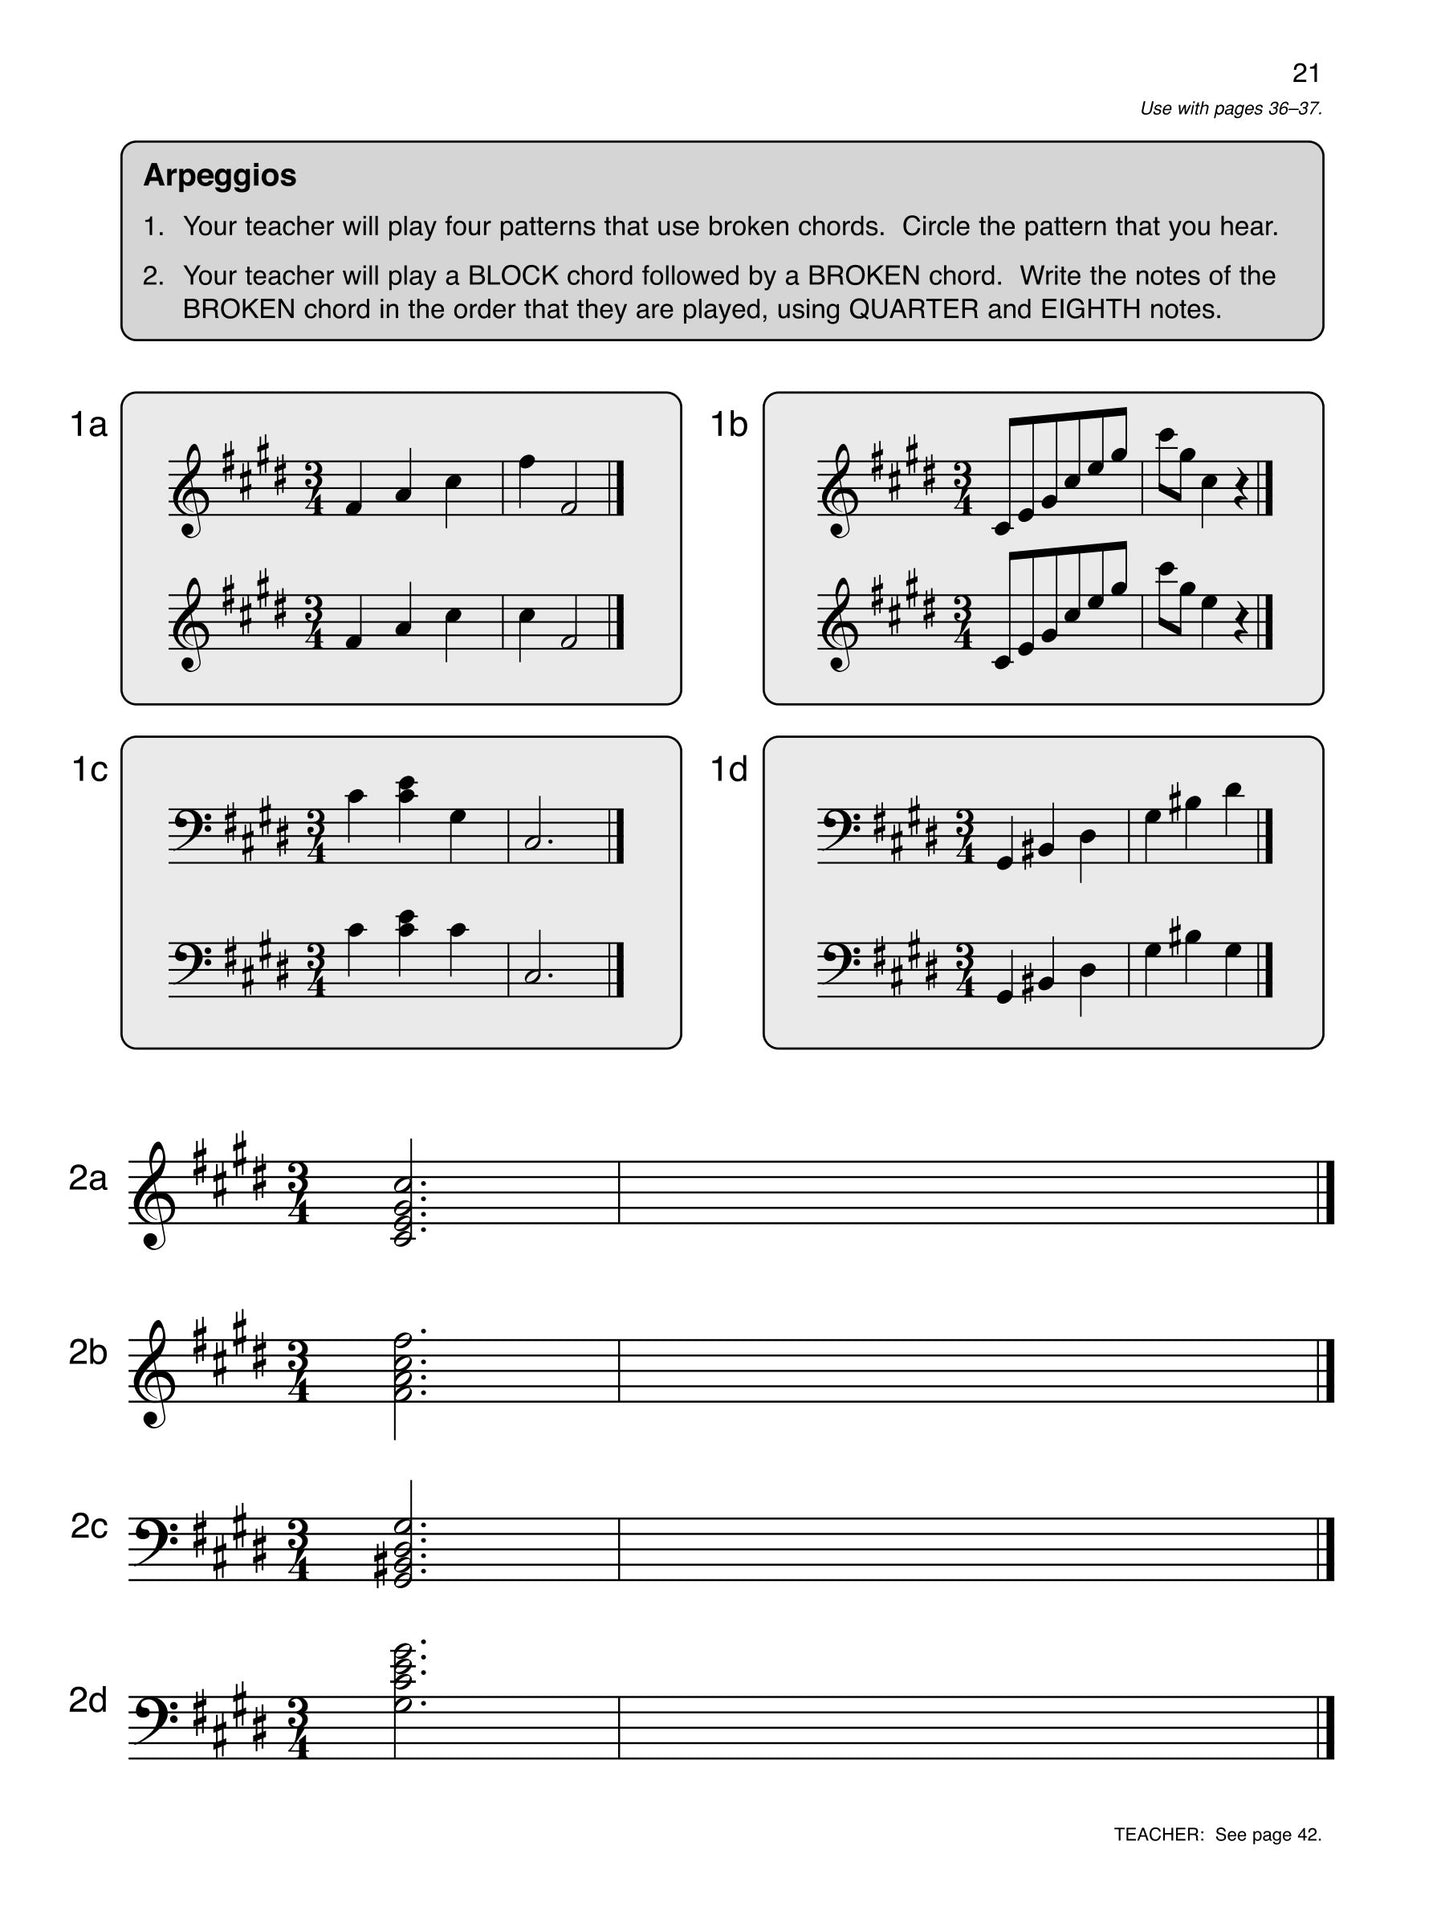 Alfred's Basic Piano Library - Ear Training Book Level 6